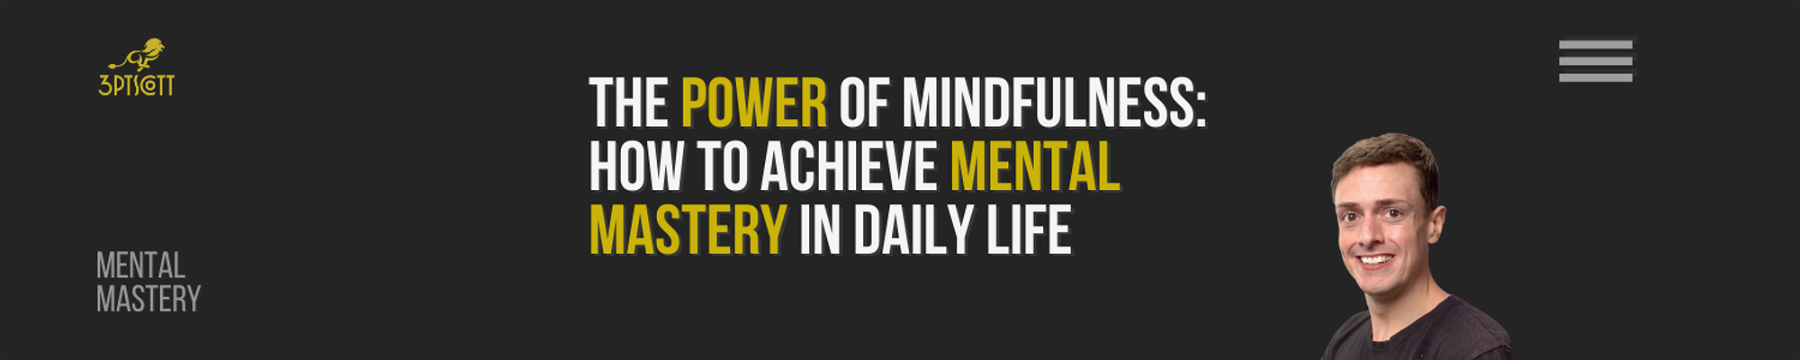 The Power of Mindfulness: How To Achieve Mental Mastery in Daily Life